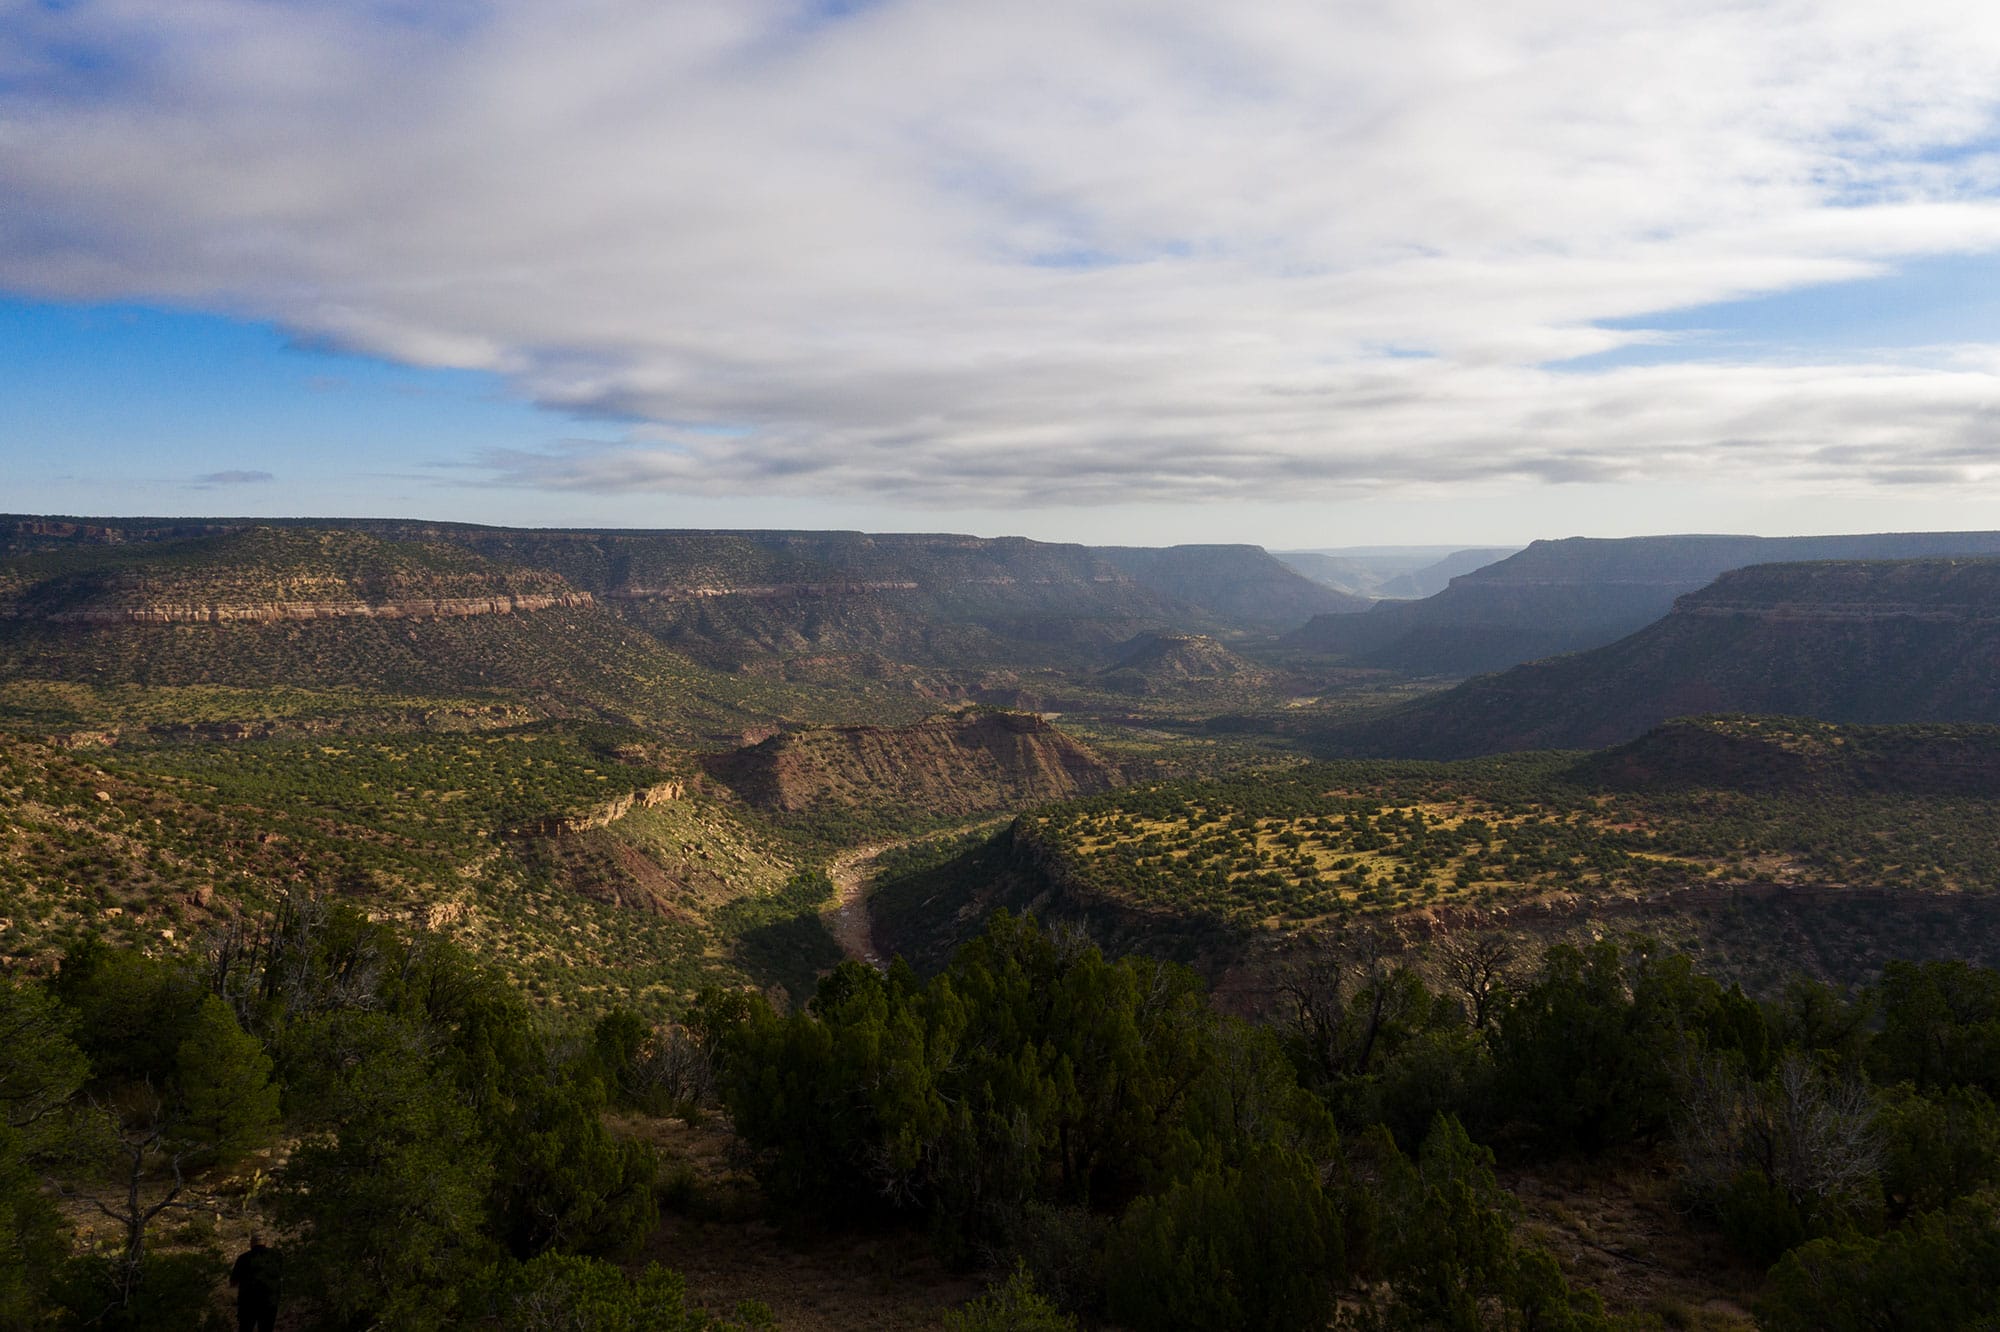 A view of a canyon with trees and a cloudy sky.